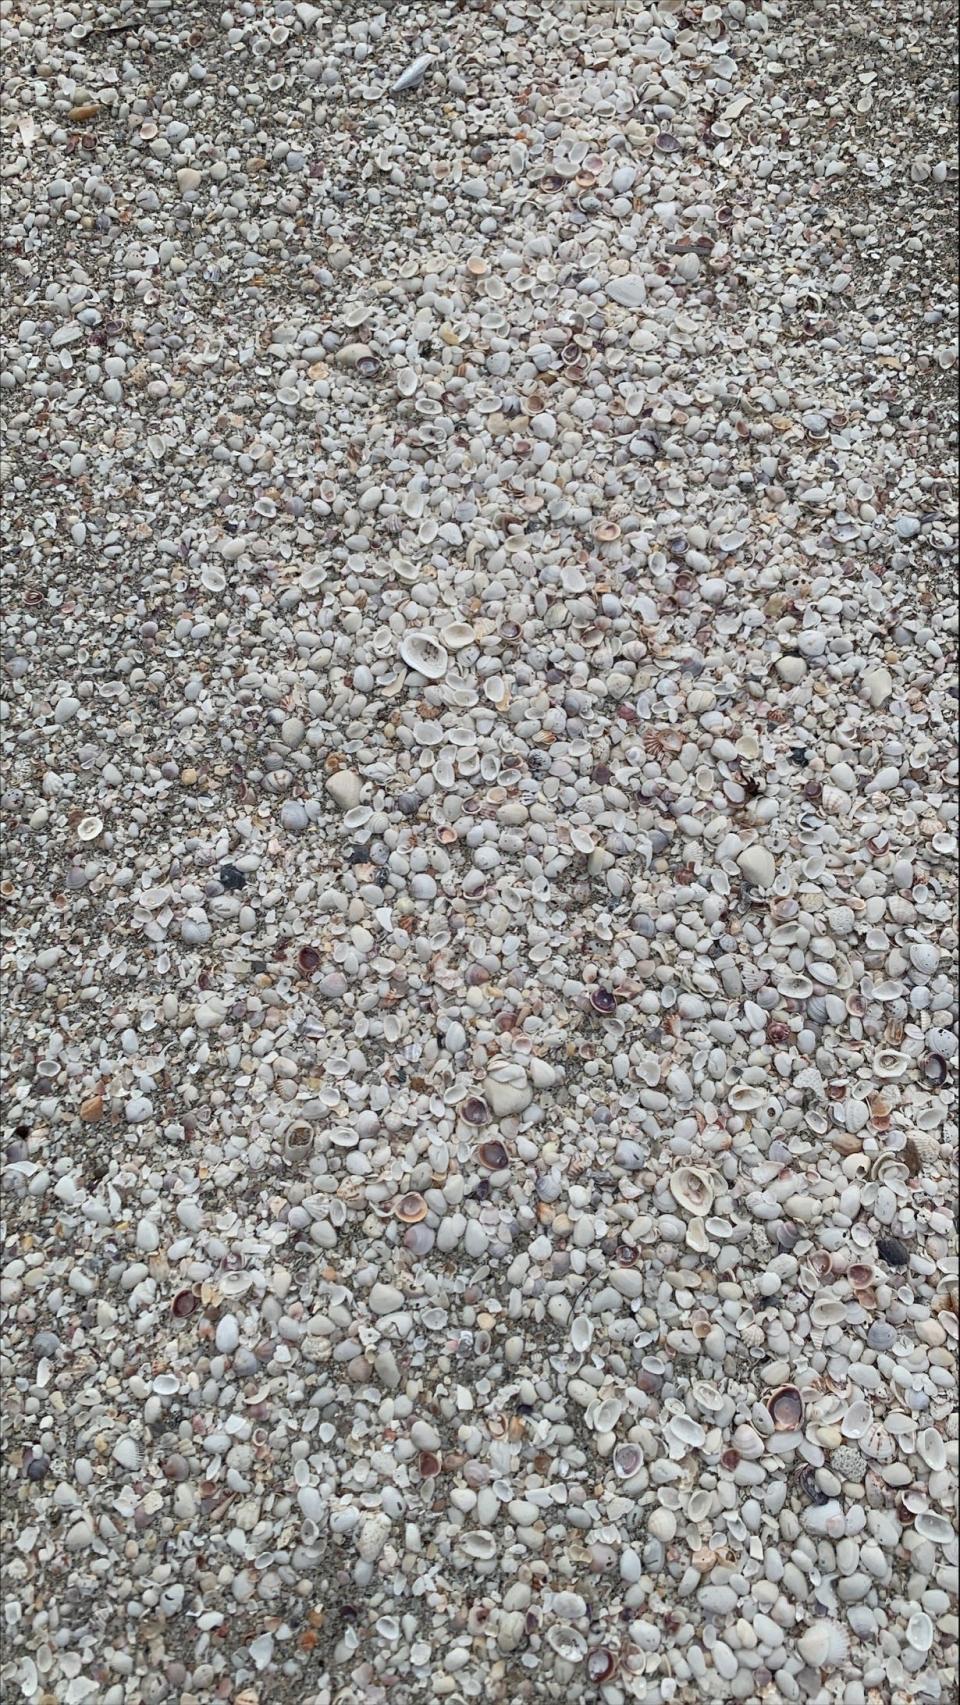 A layer of tiny white seashells covers the beaches of Sanibel on Thursday, Oct. 20.